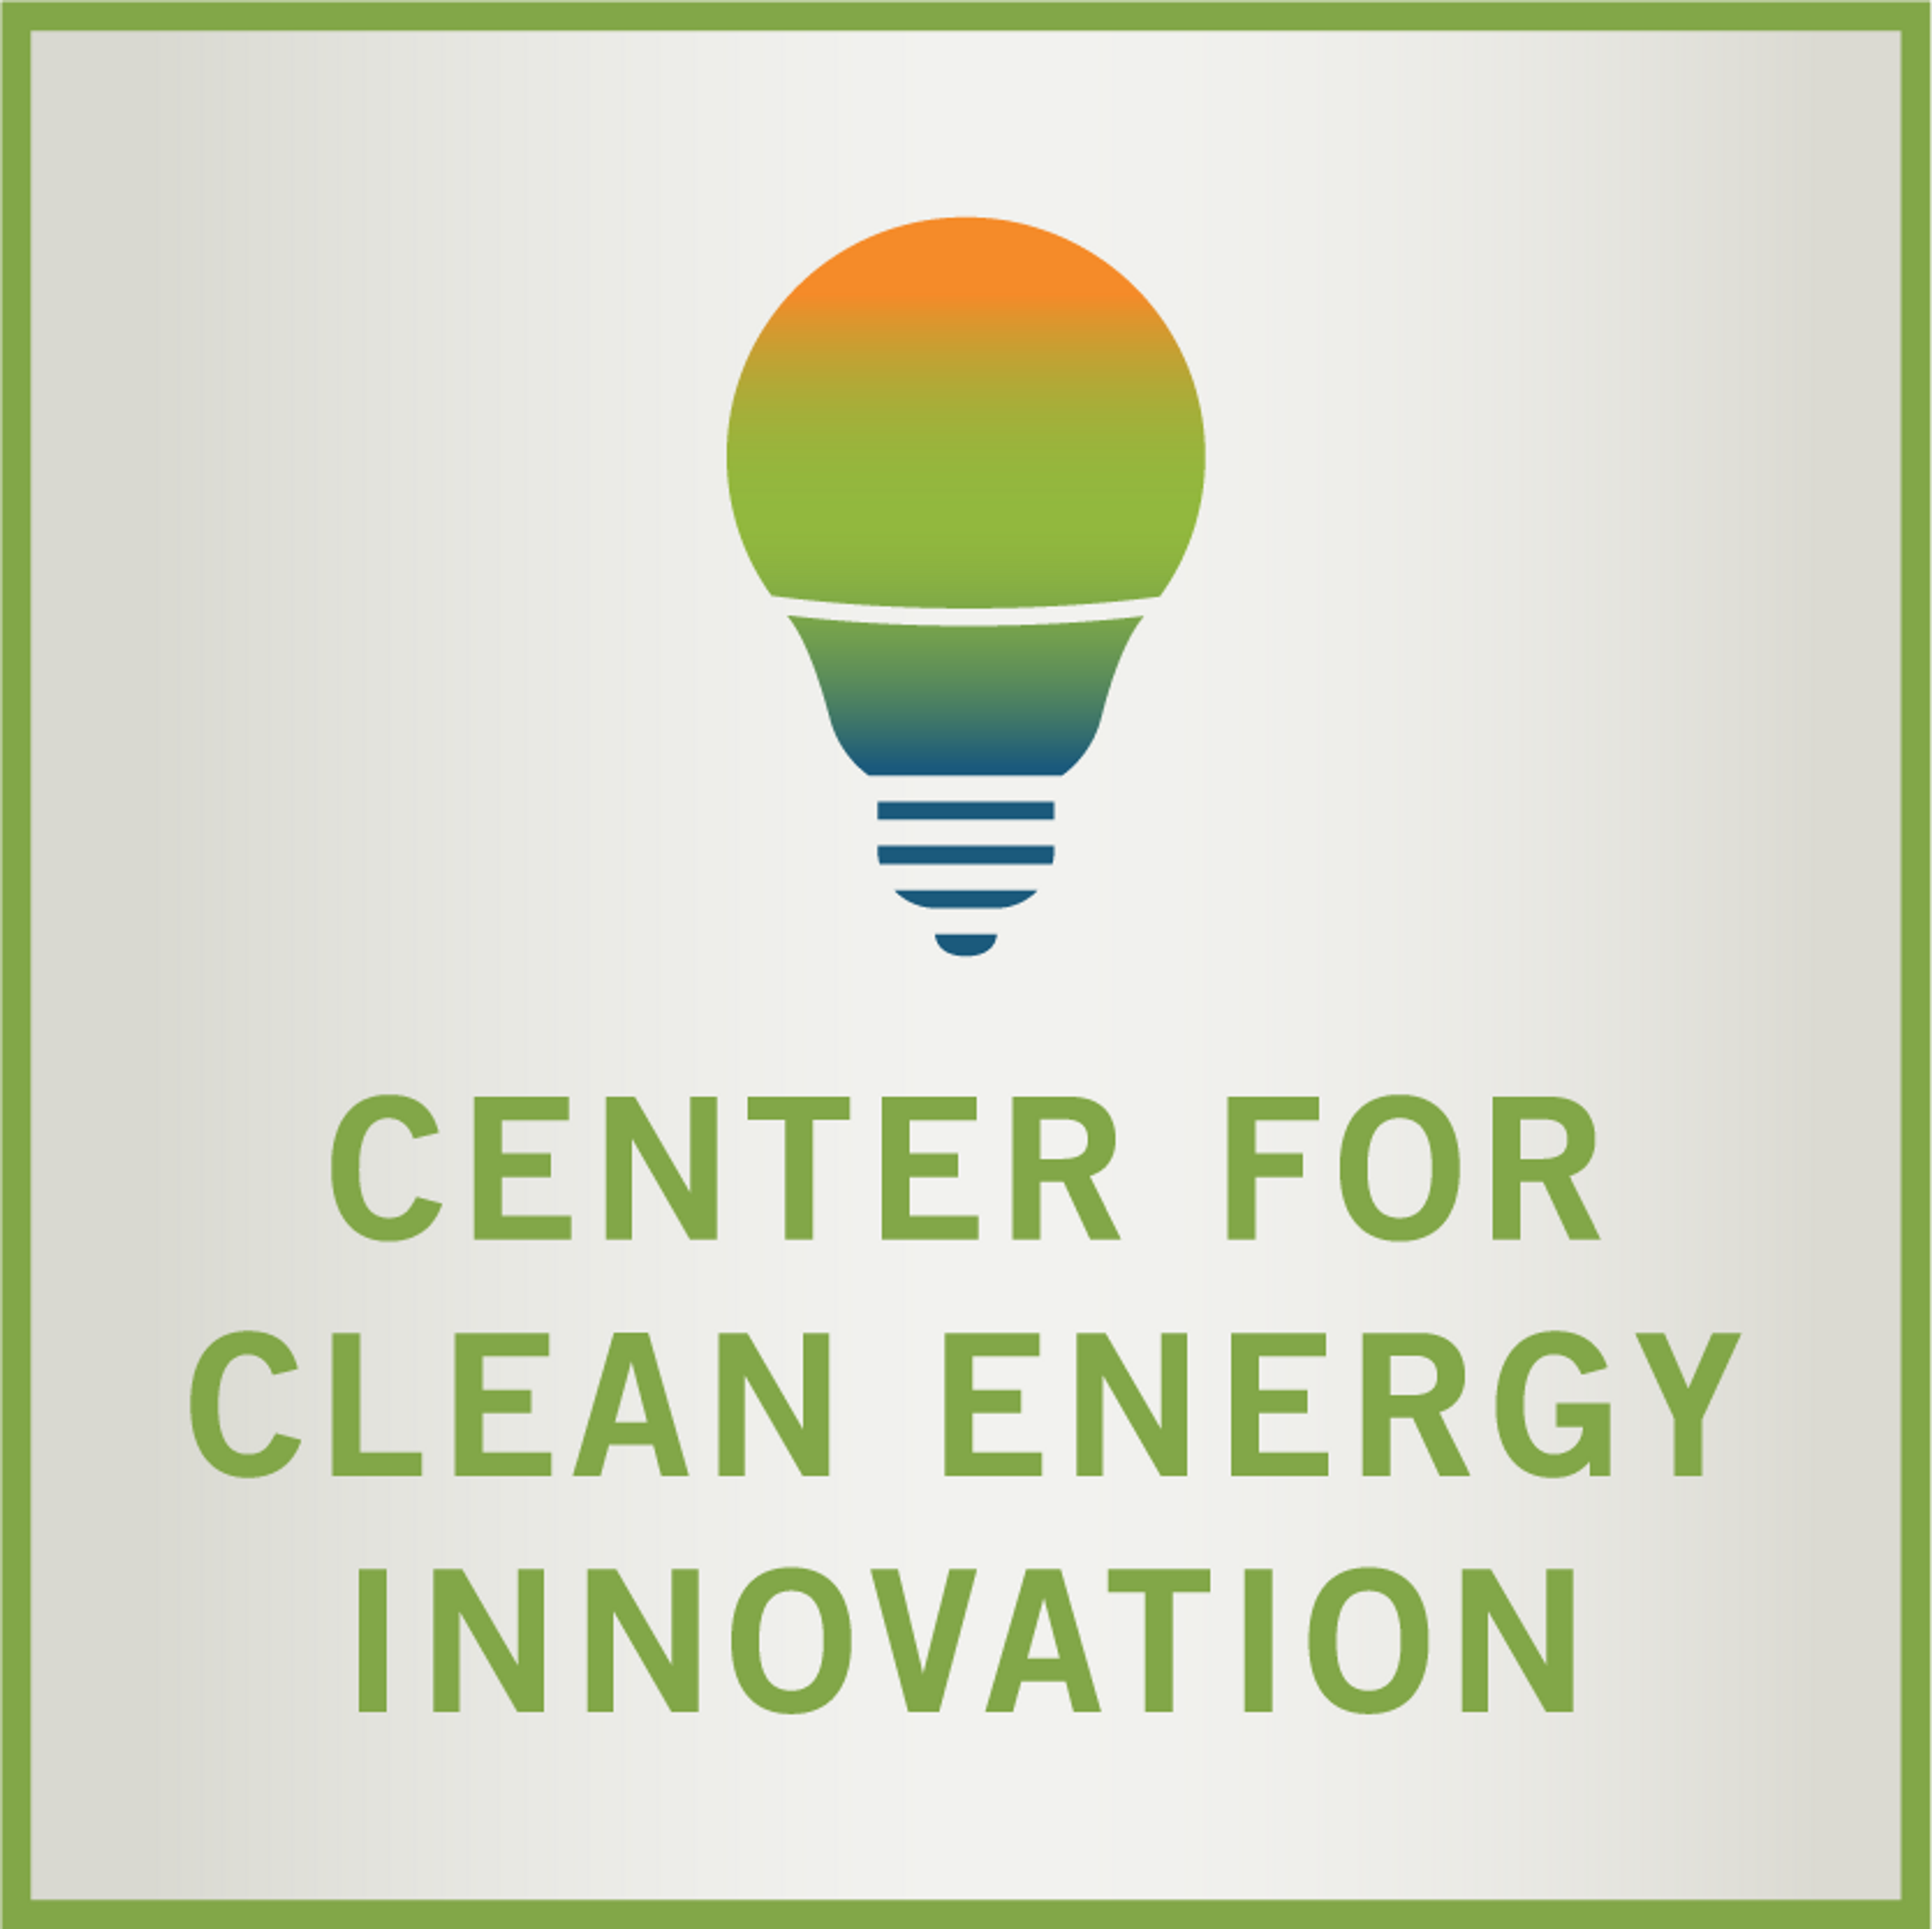 Energizing Innovation: Raising the Ambition for Federal Energy RD&D in Fiscal Year 2022